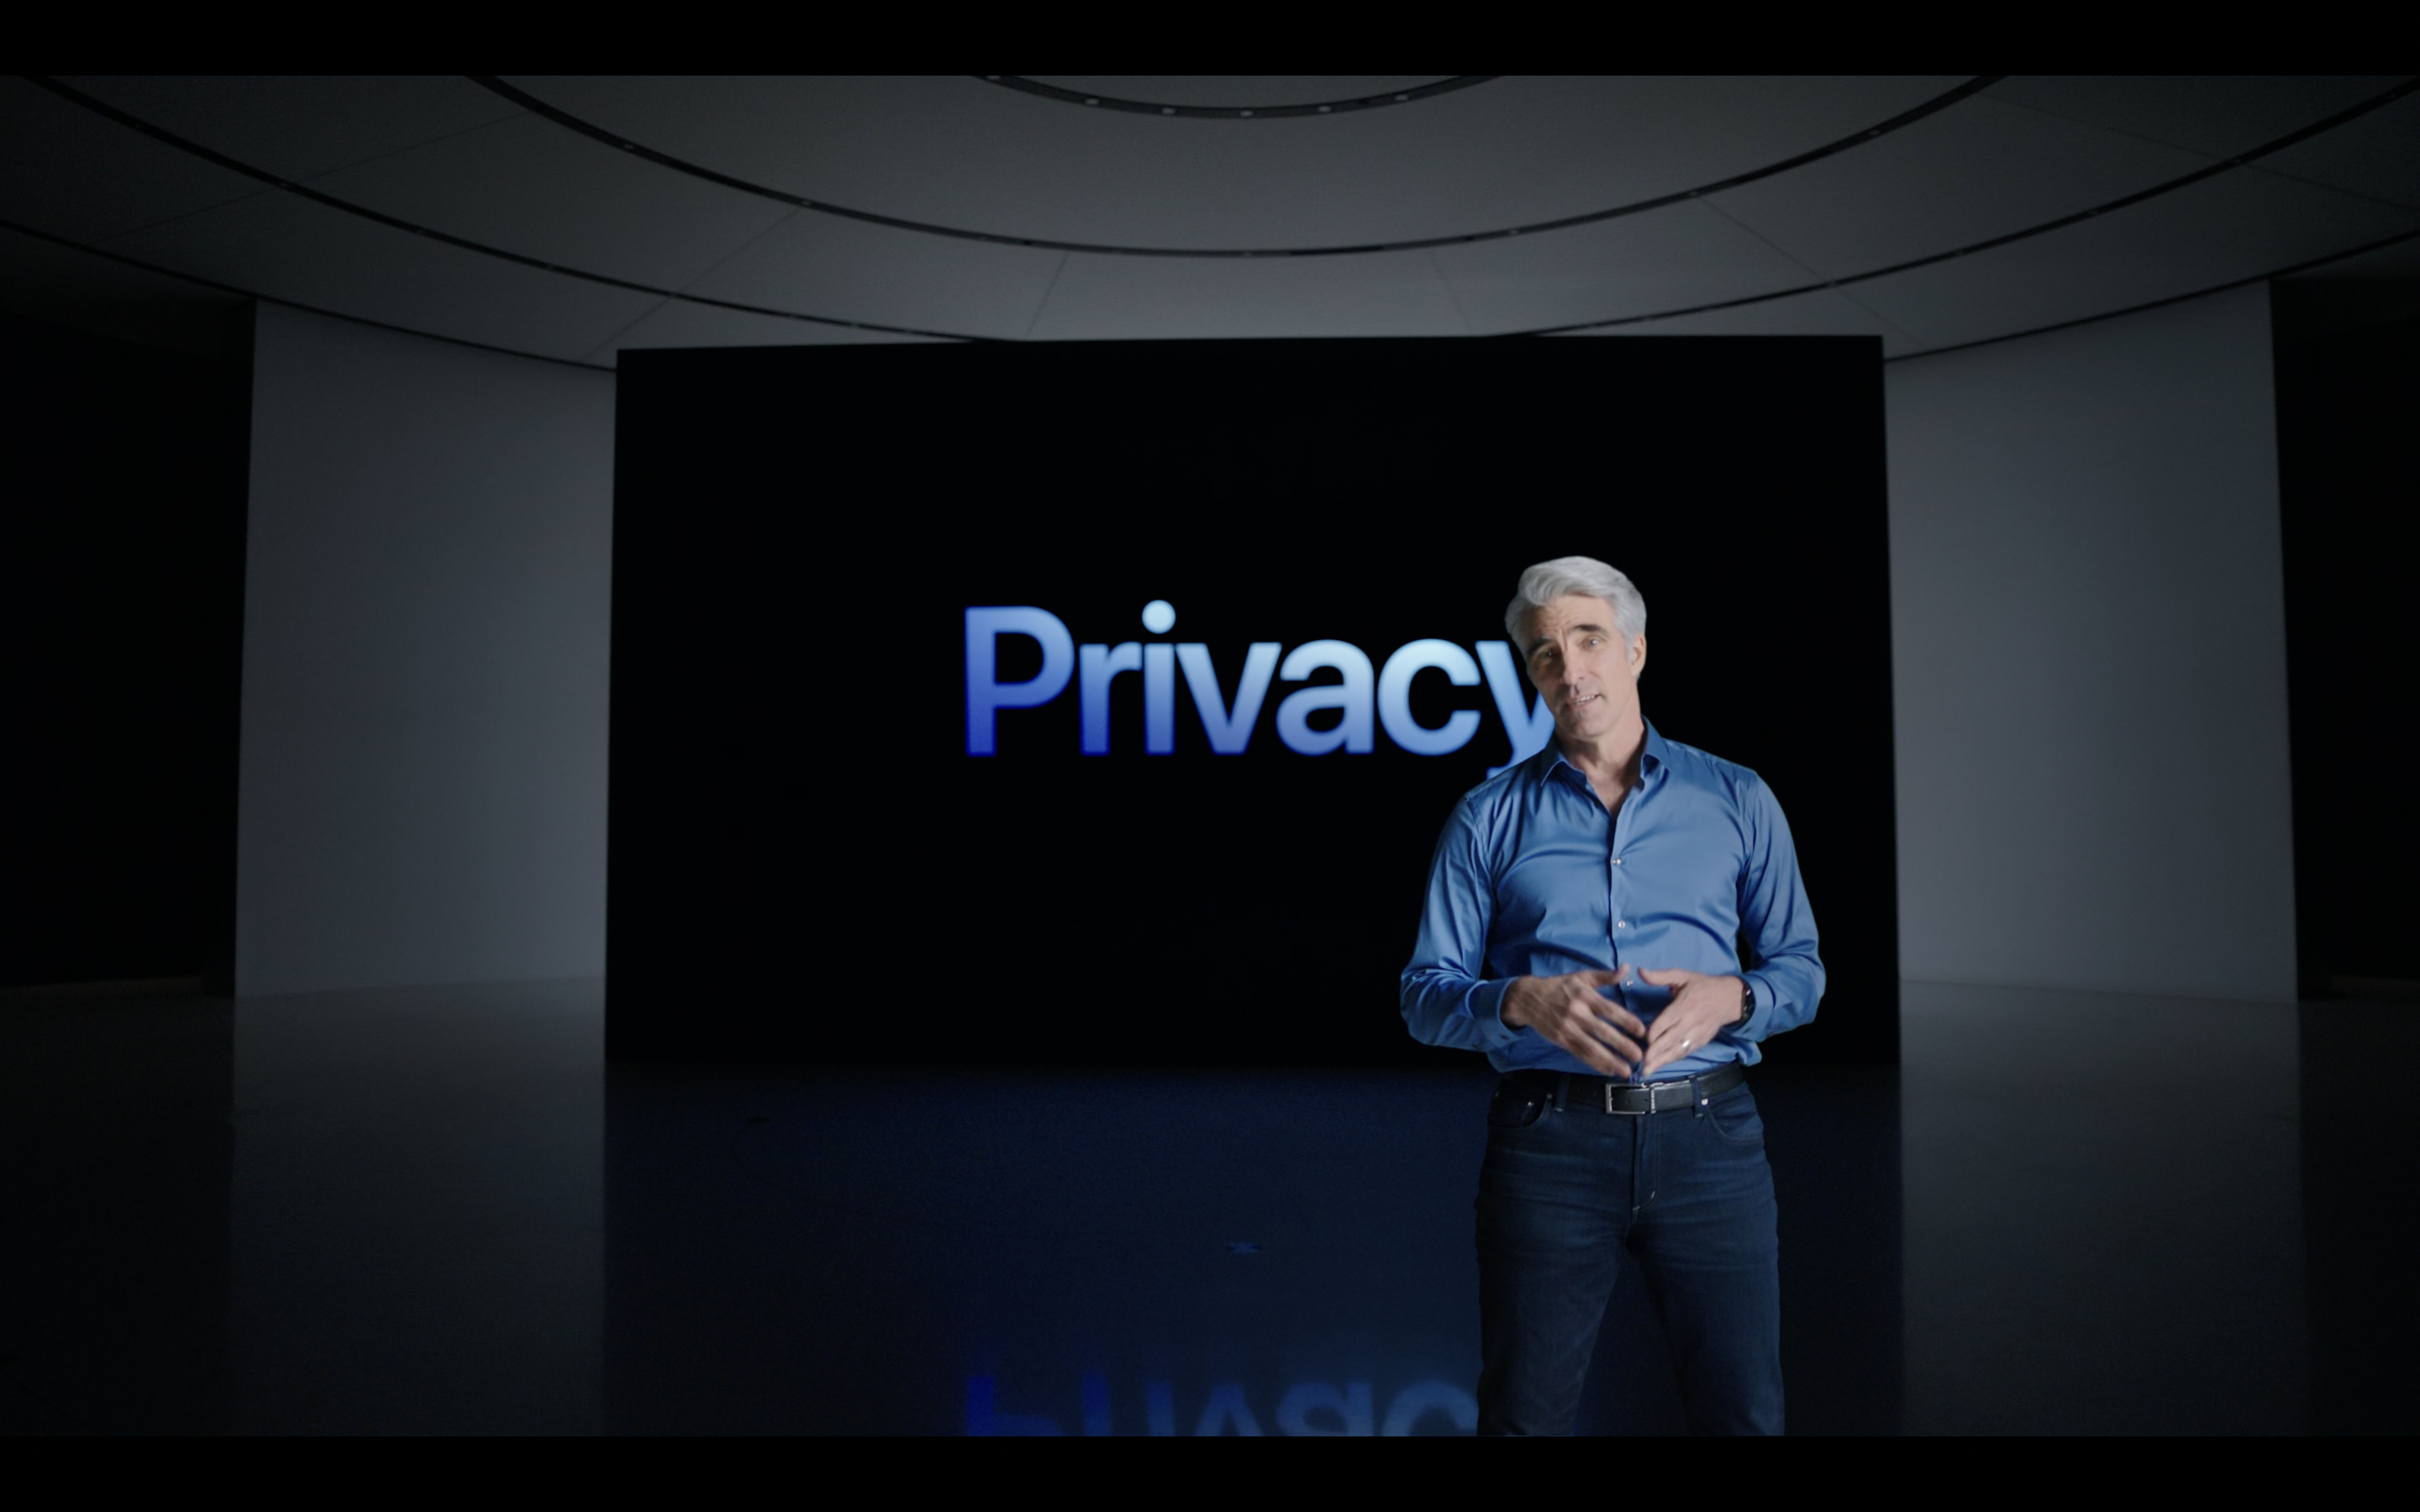 Apple's Privacy Features Have Cost Social Media Companies Nearly $10 Billion in Revenue